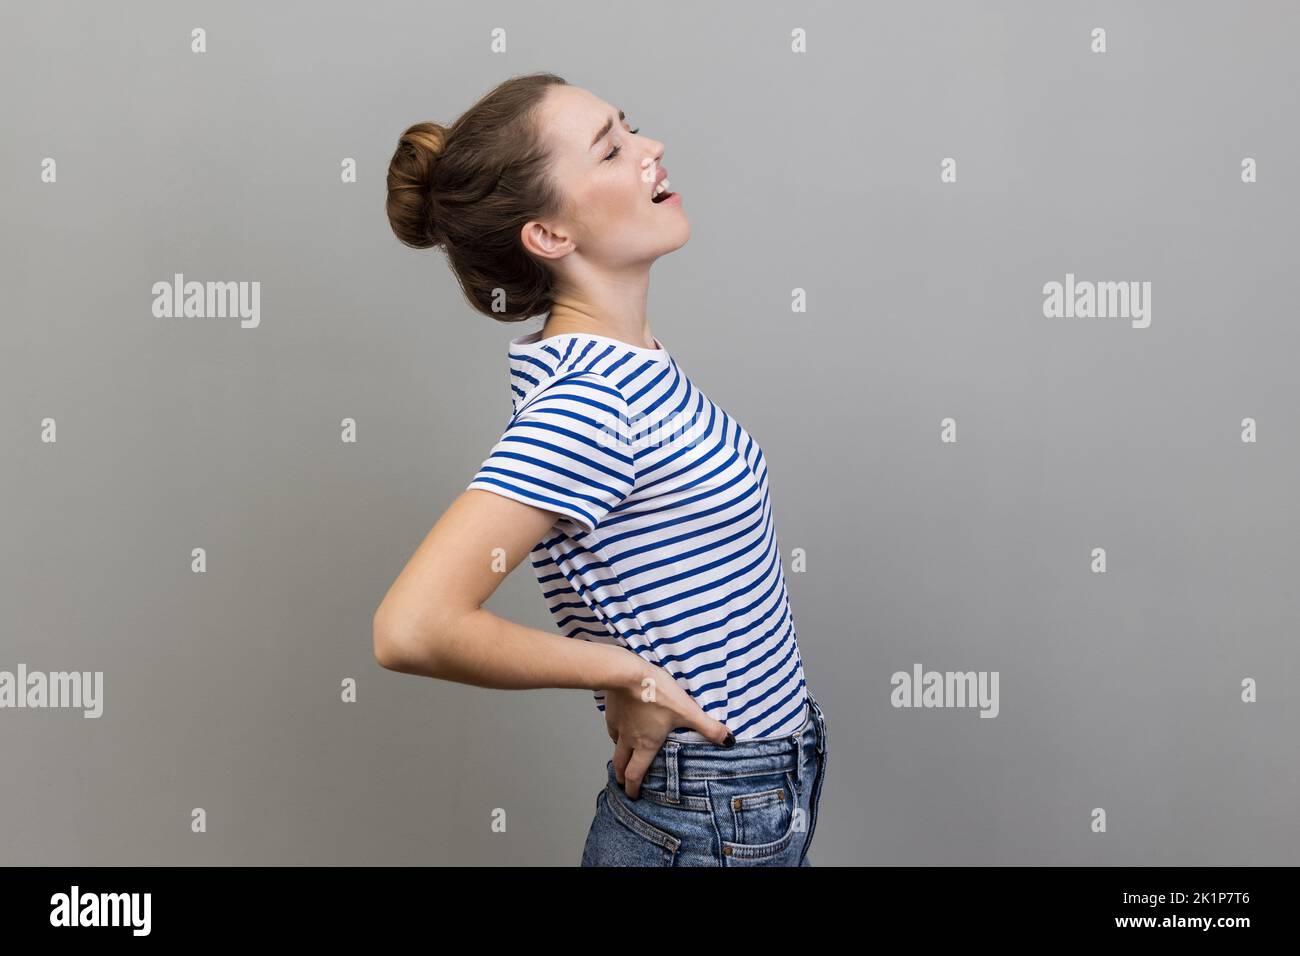 Back, kidney or spine pain. Portrait of woman wearing striped T-shirt standing and endure pain on back, frowning face from pain. Indoor studio shot isolated on gray background. Stock Photo